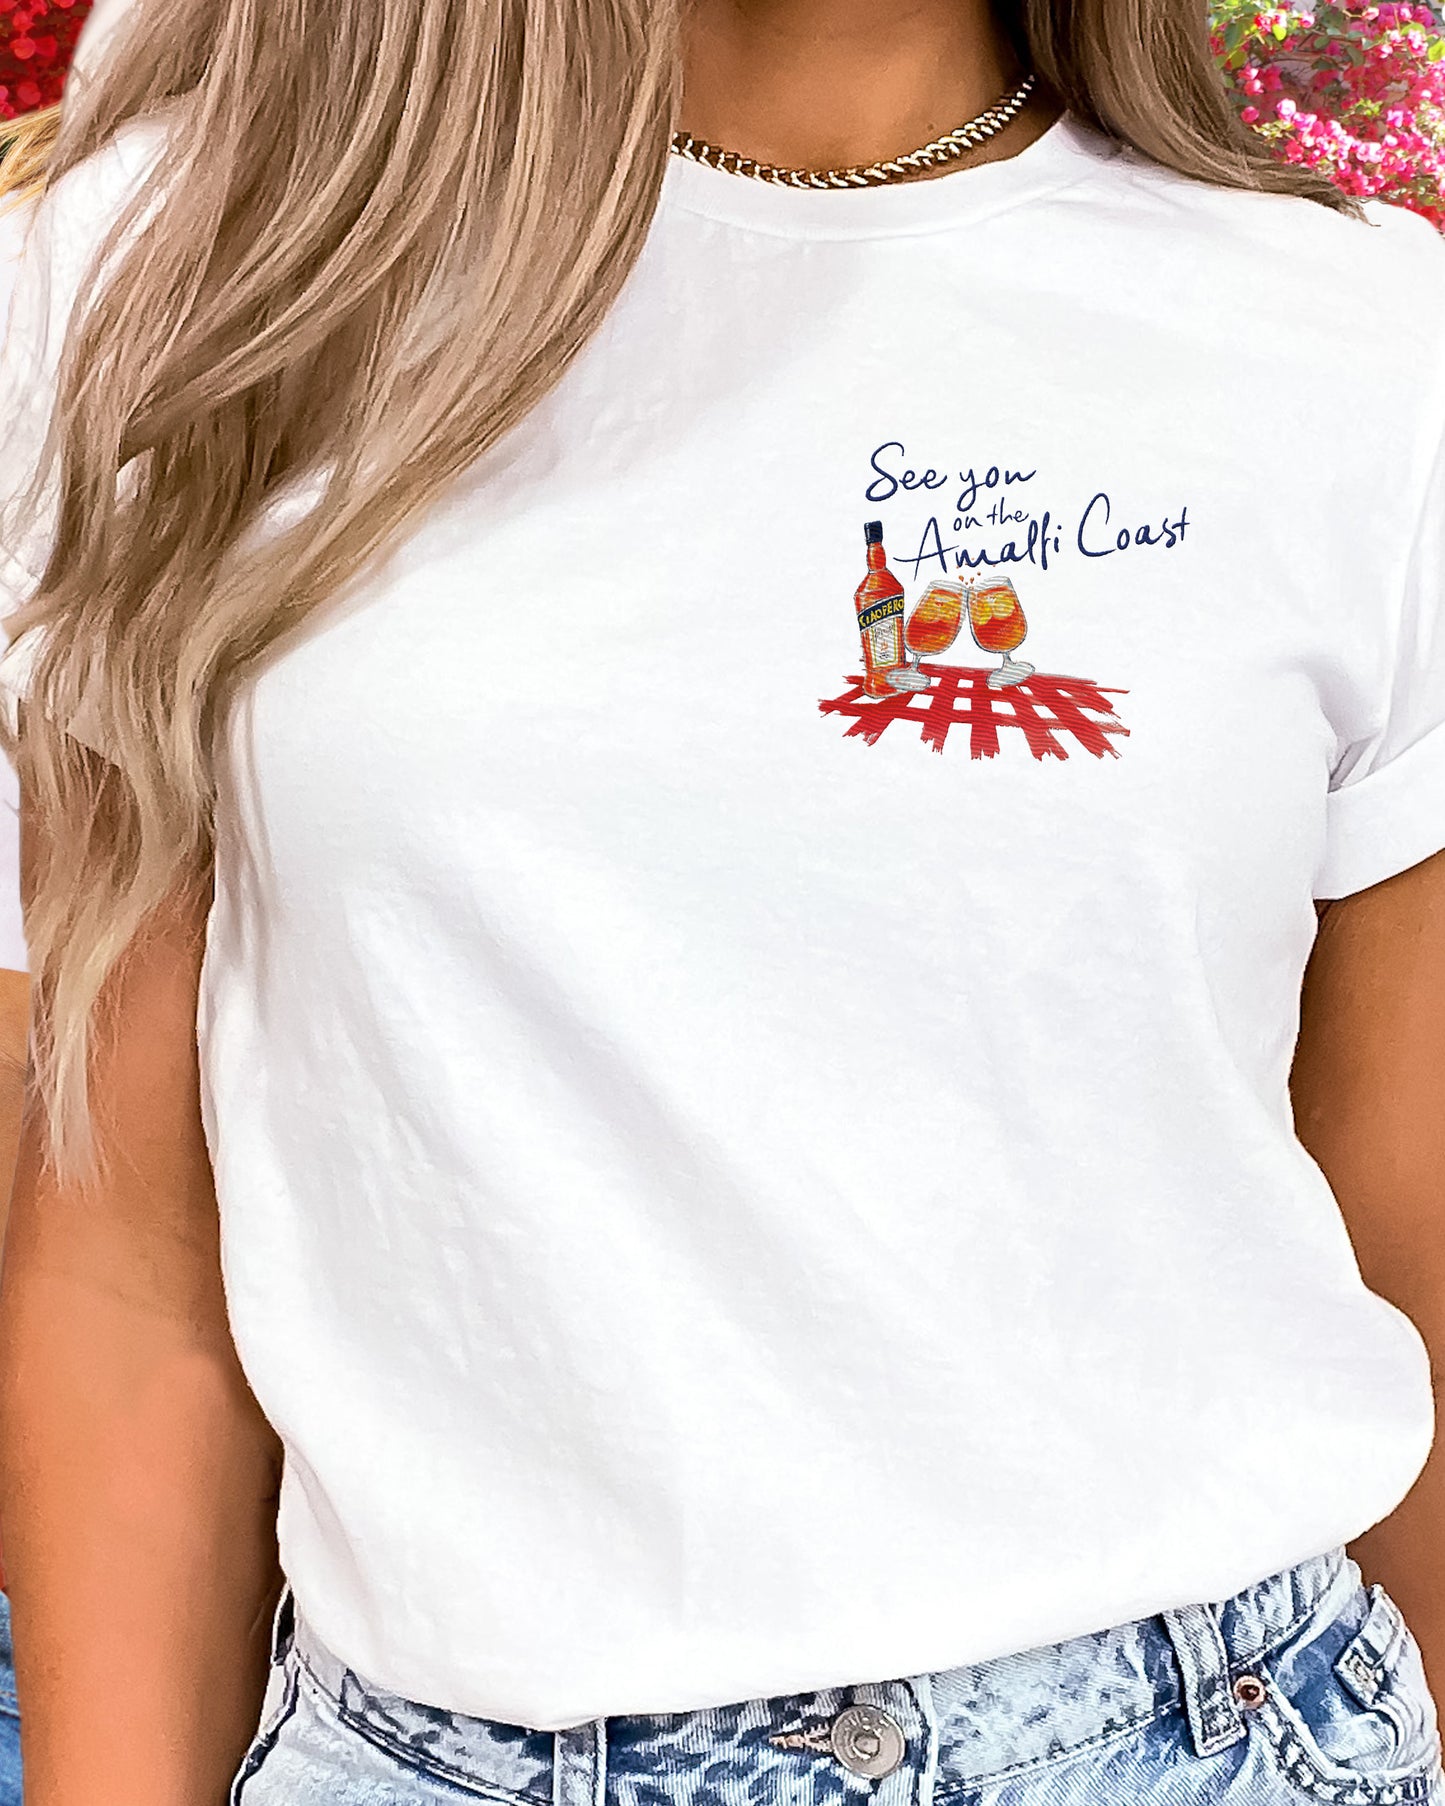 See you on thr Amalfi CoastWhite cotton T shirt with an embroidered illustration on the left chest of two Aperol Spritz glasses in red-orange colors and a Aperol bottle on a red checkered tablecloth. Above, a Navy blue embroidered quote: See you on the Amalfi Coast.